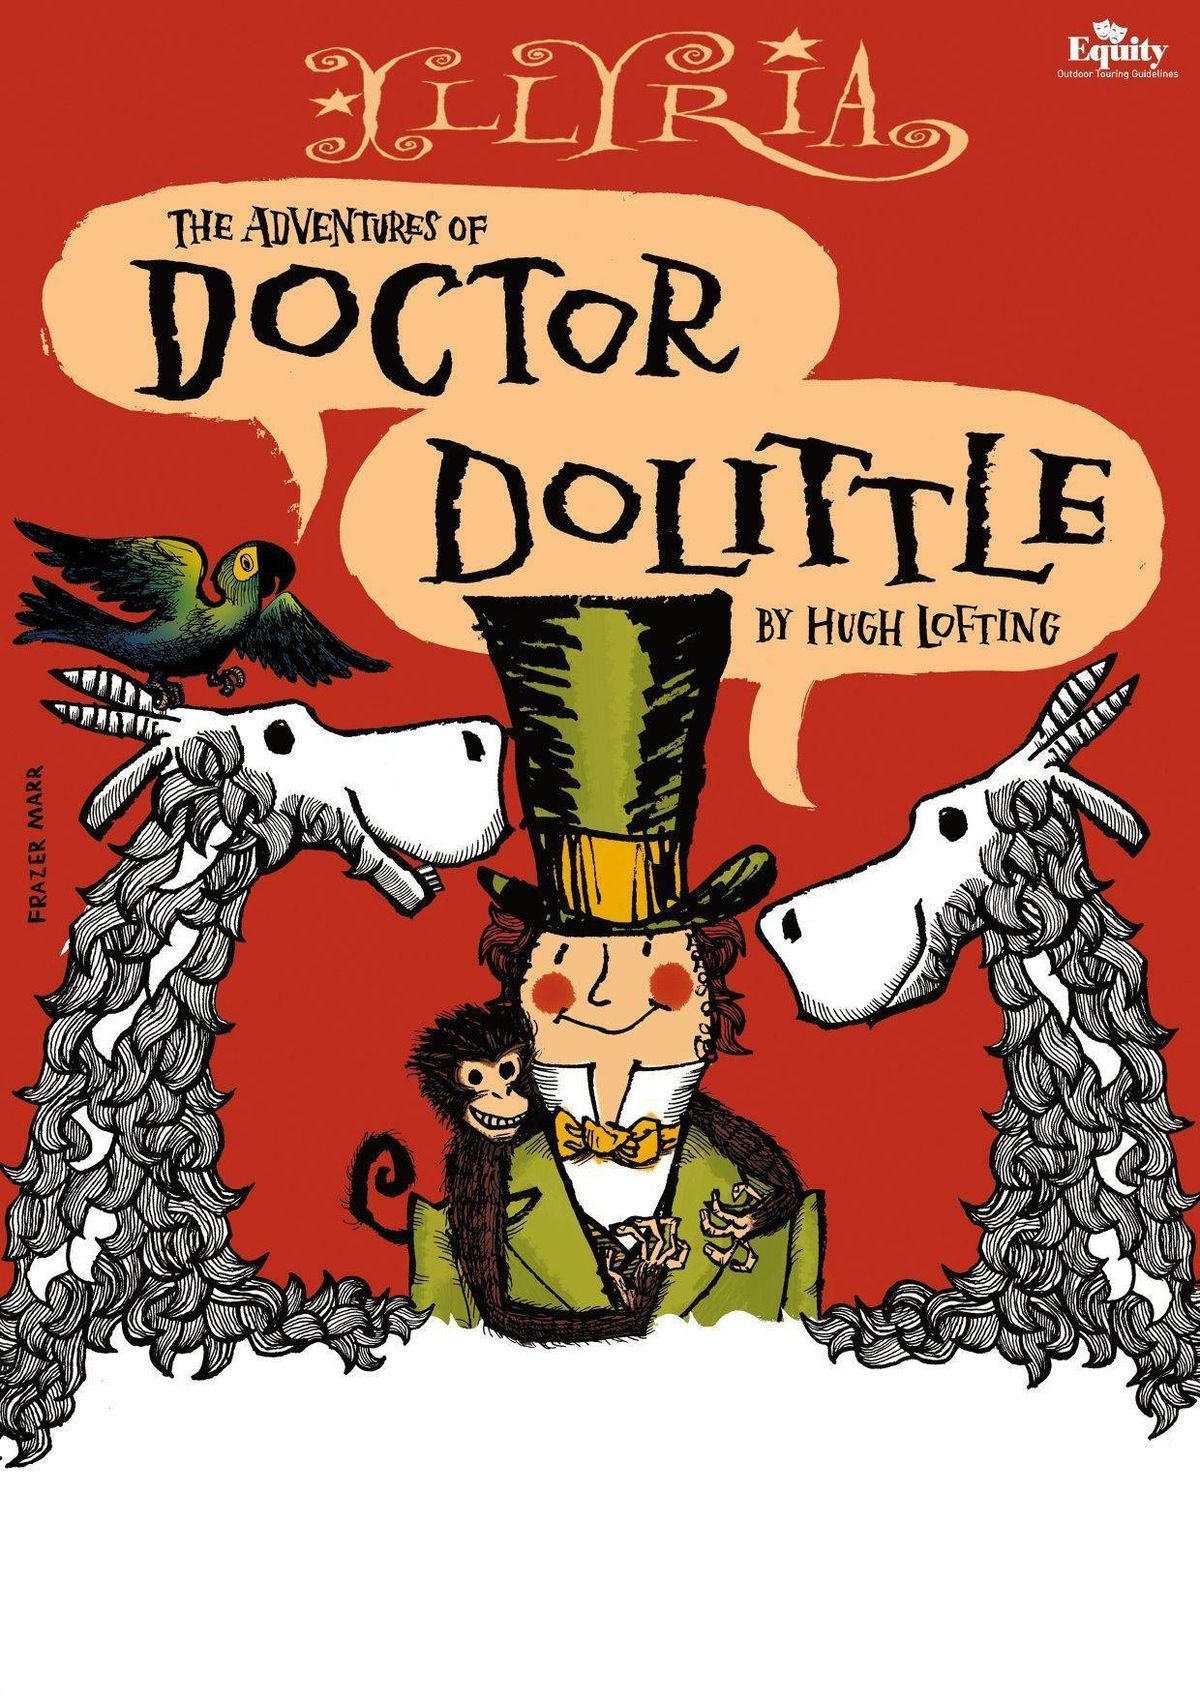 Open Air Theatre at Chichester Cathedral | The Adventures of Doctor Dolittle with Illyria